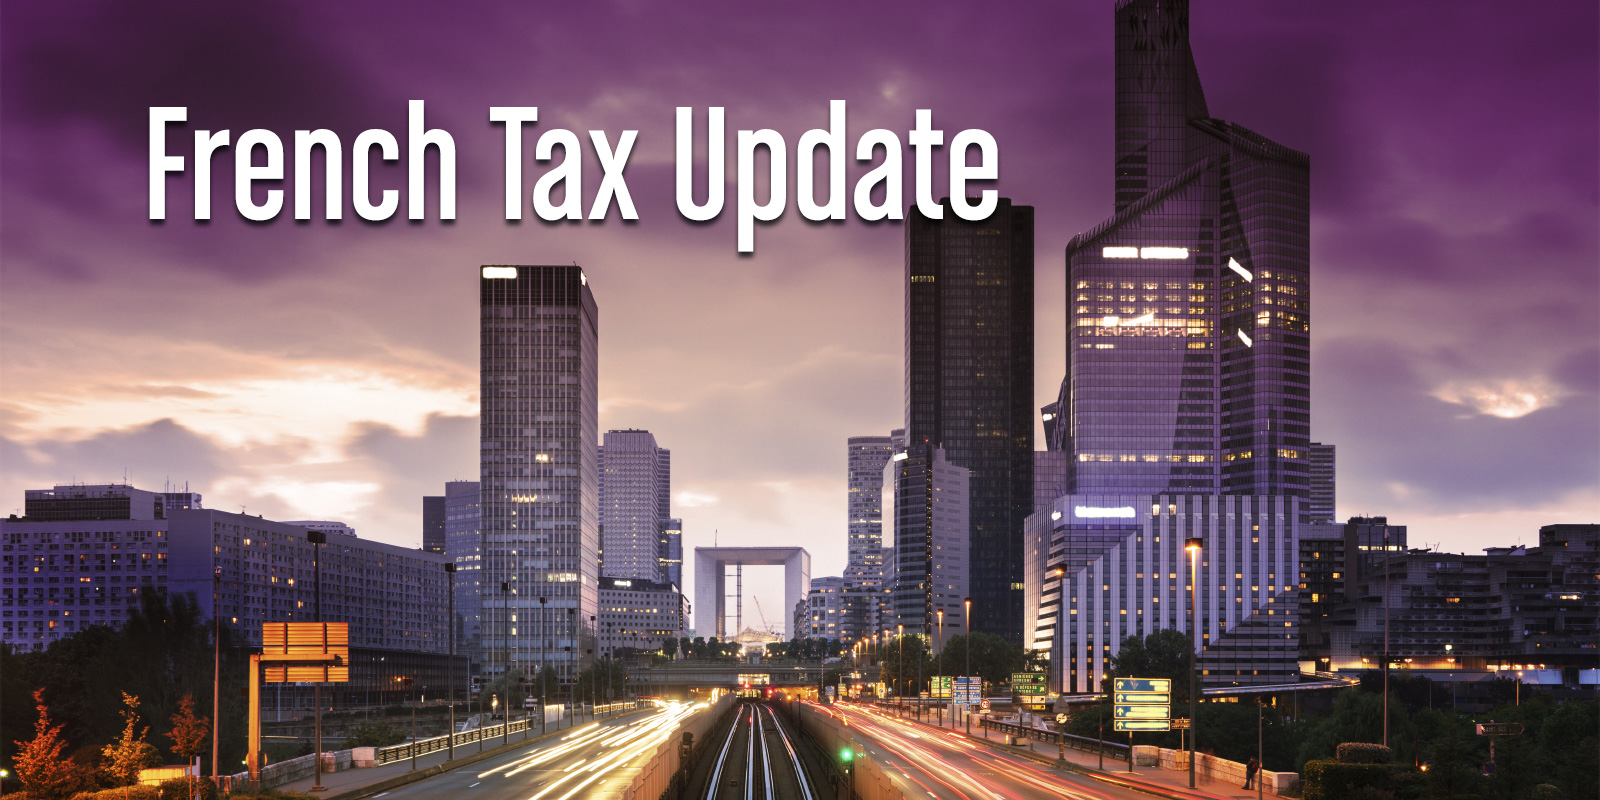 French Tax Update - Repeal of the 3 Percent Tax on Distributions, Exceptional Corporate Surtax, and AFME FTT Protocol